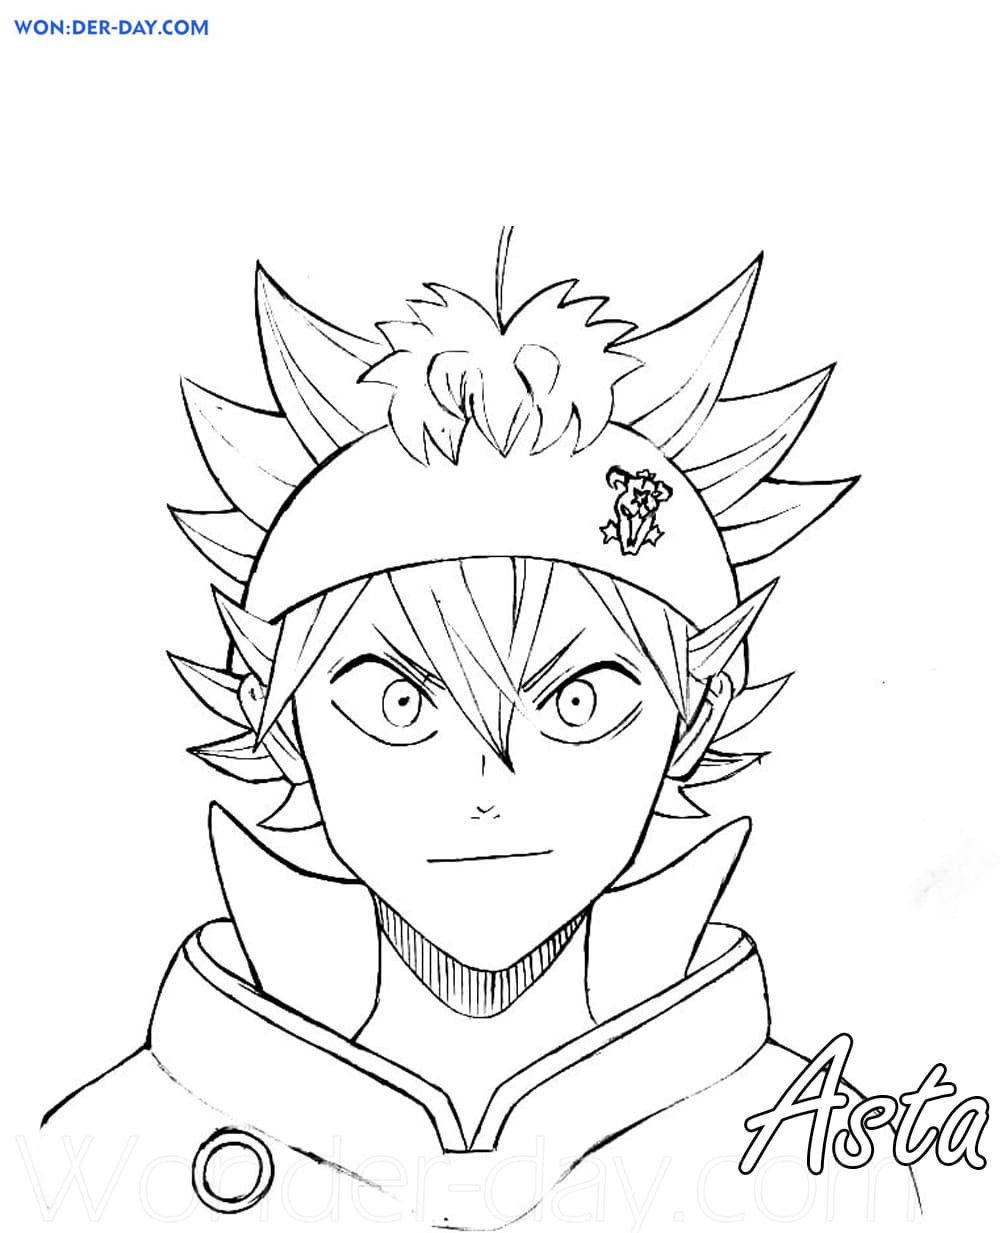 Black Clover Coloring Pages - Coloring Home